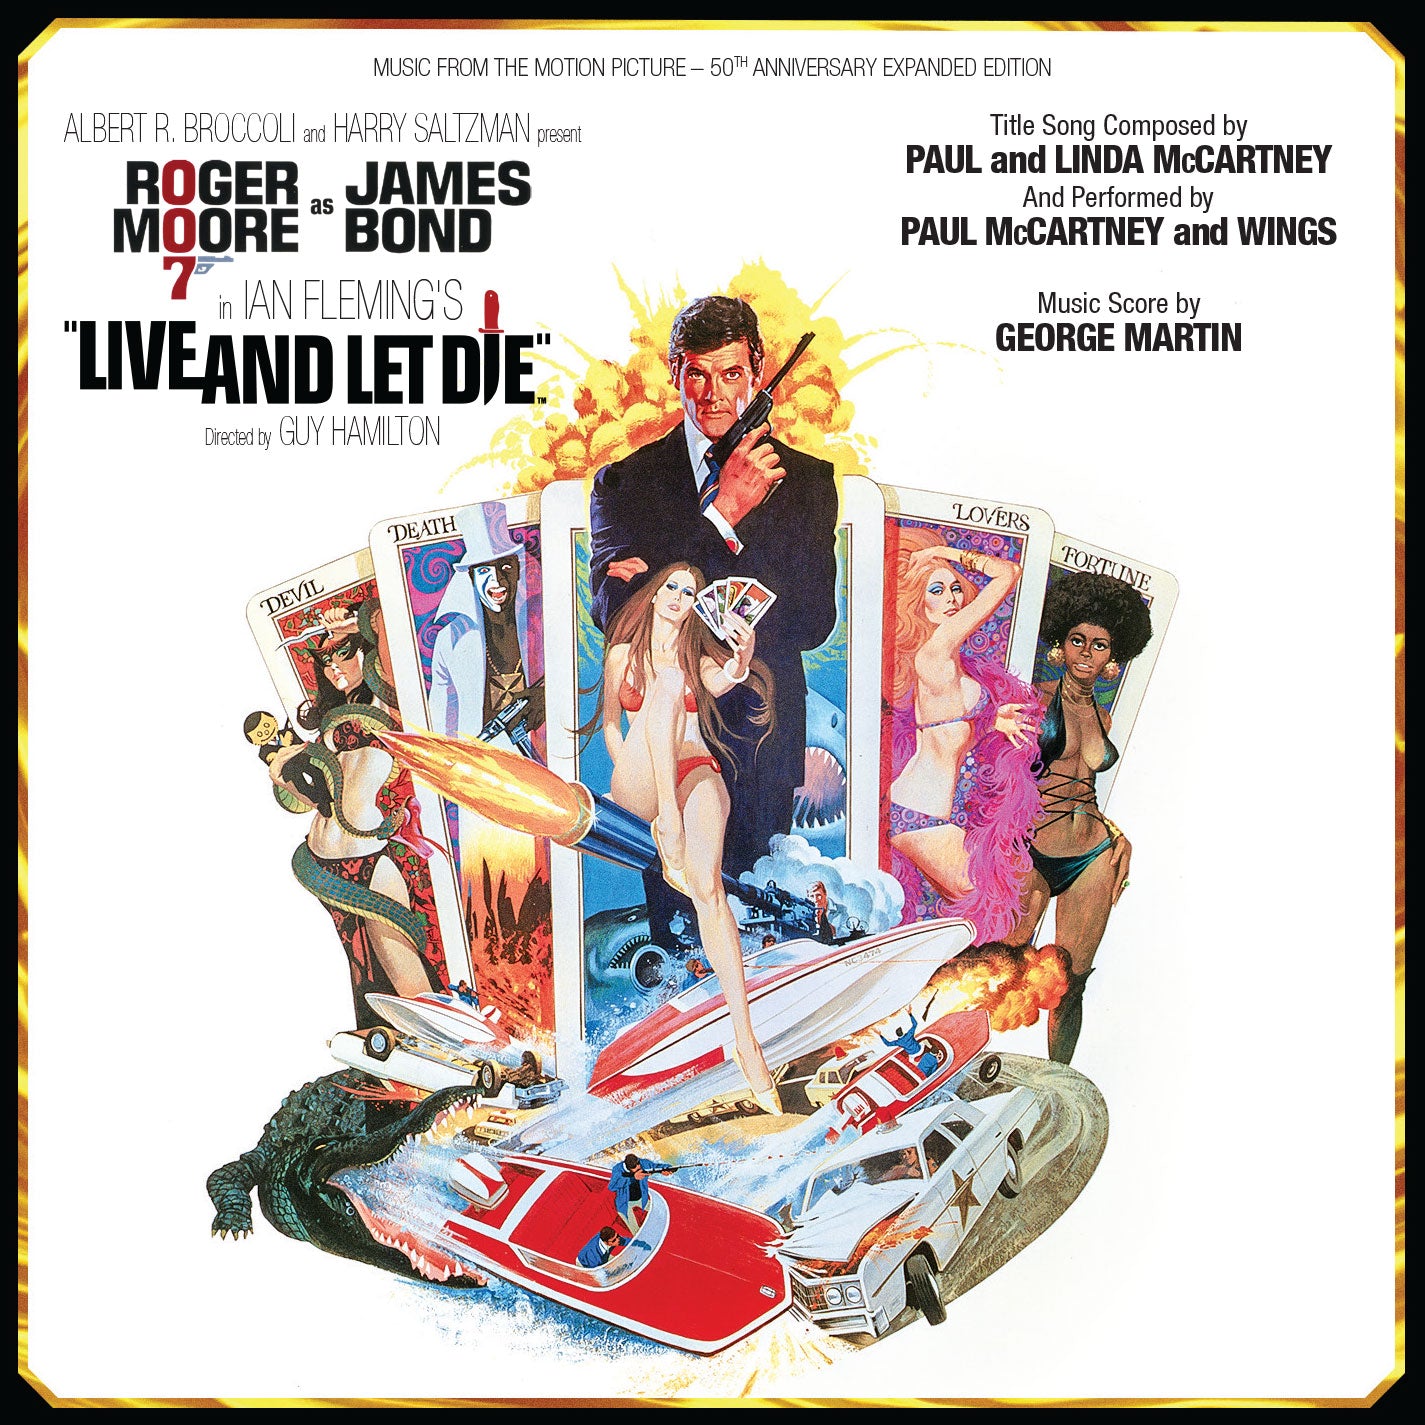 James Bond Live And Let Die Soundtrack Double CD Set - 50th Anniversary Expanded Remastered Edition